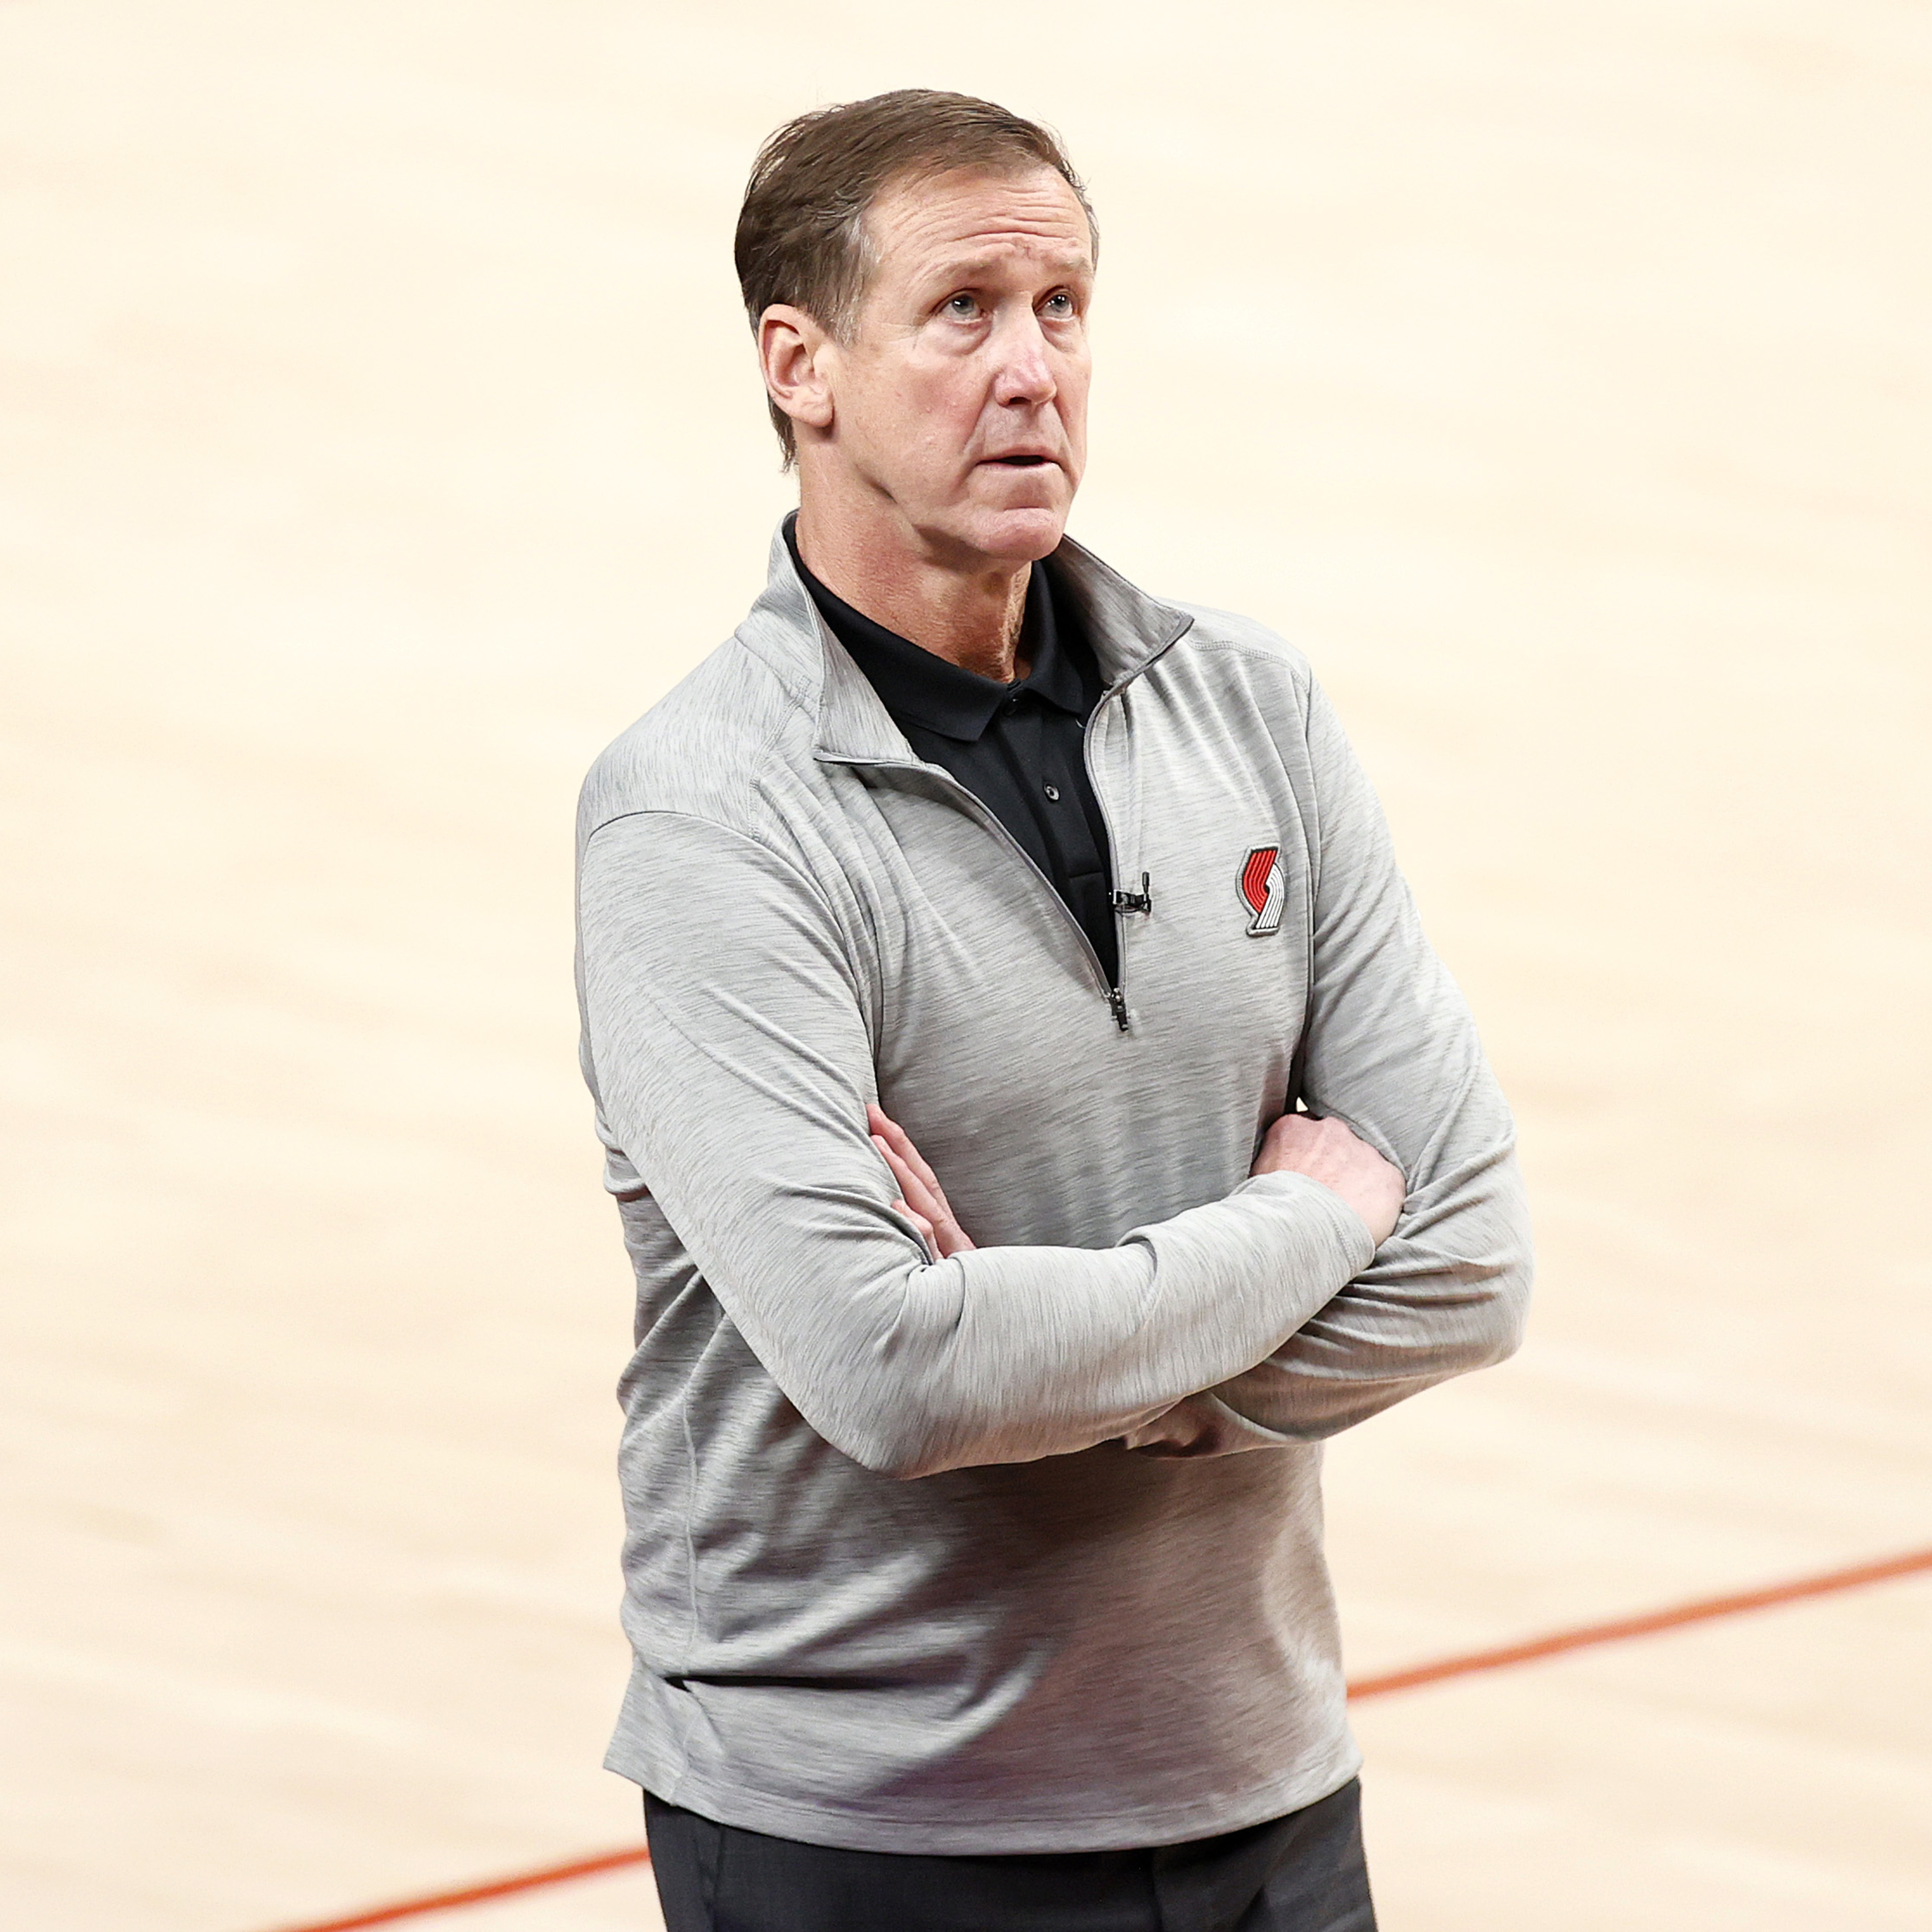 Lakers Rumors: Former Blazers HC Terry Stotts Interviews for Head Coaching Job